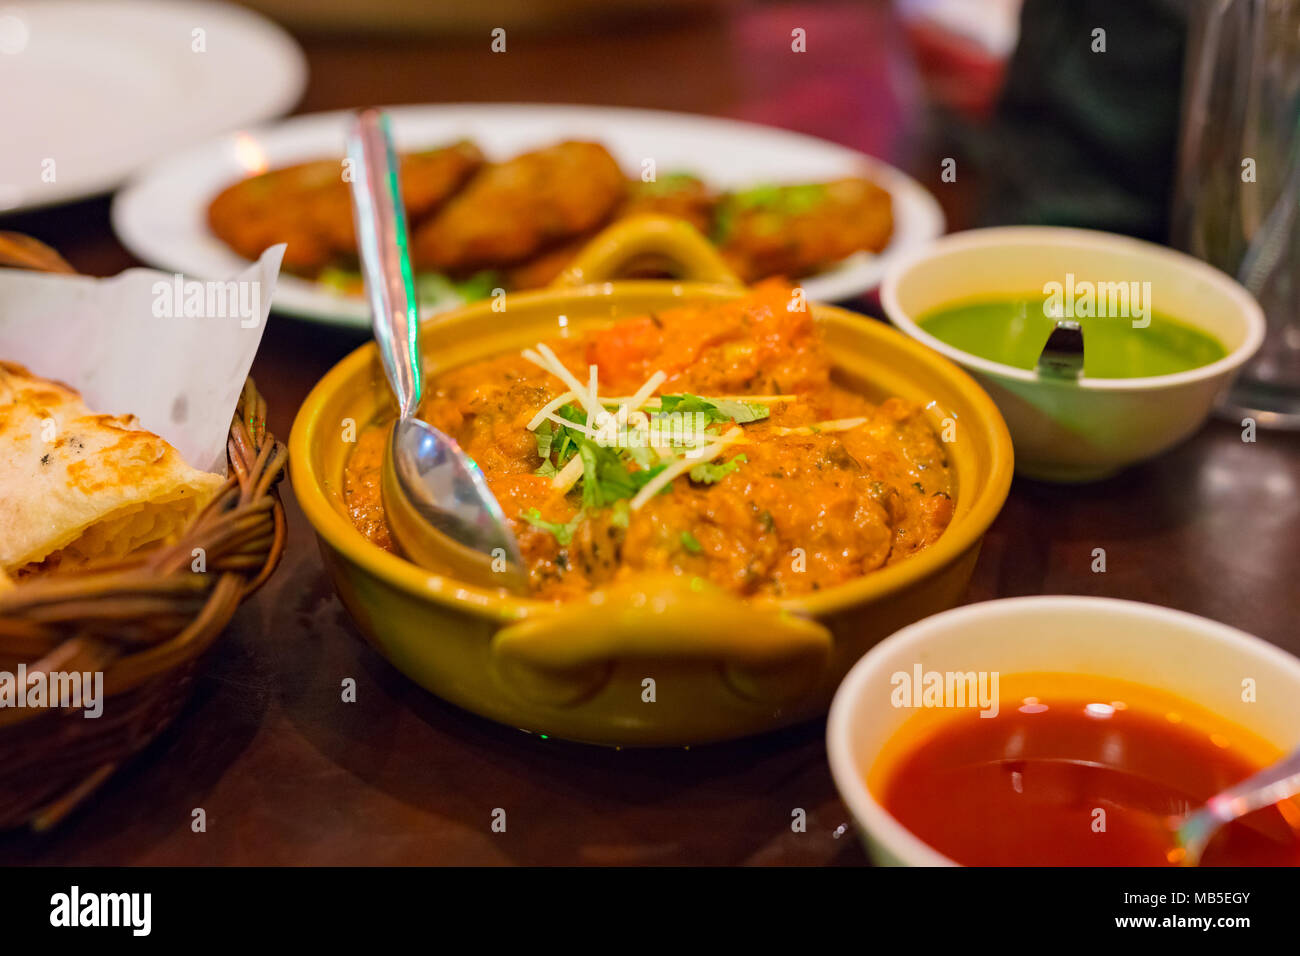 Massaman Curry Served On Table In Restaurant Stock Photo